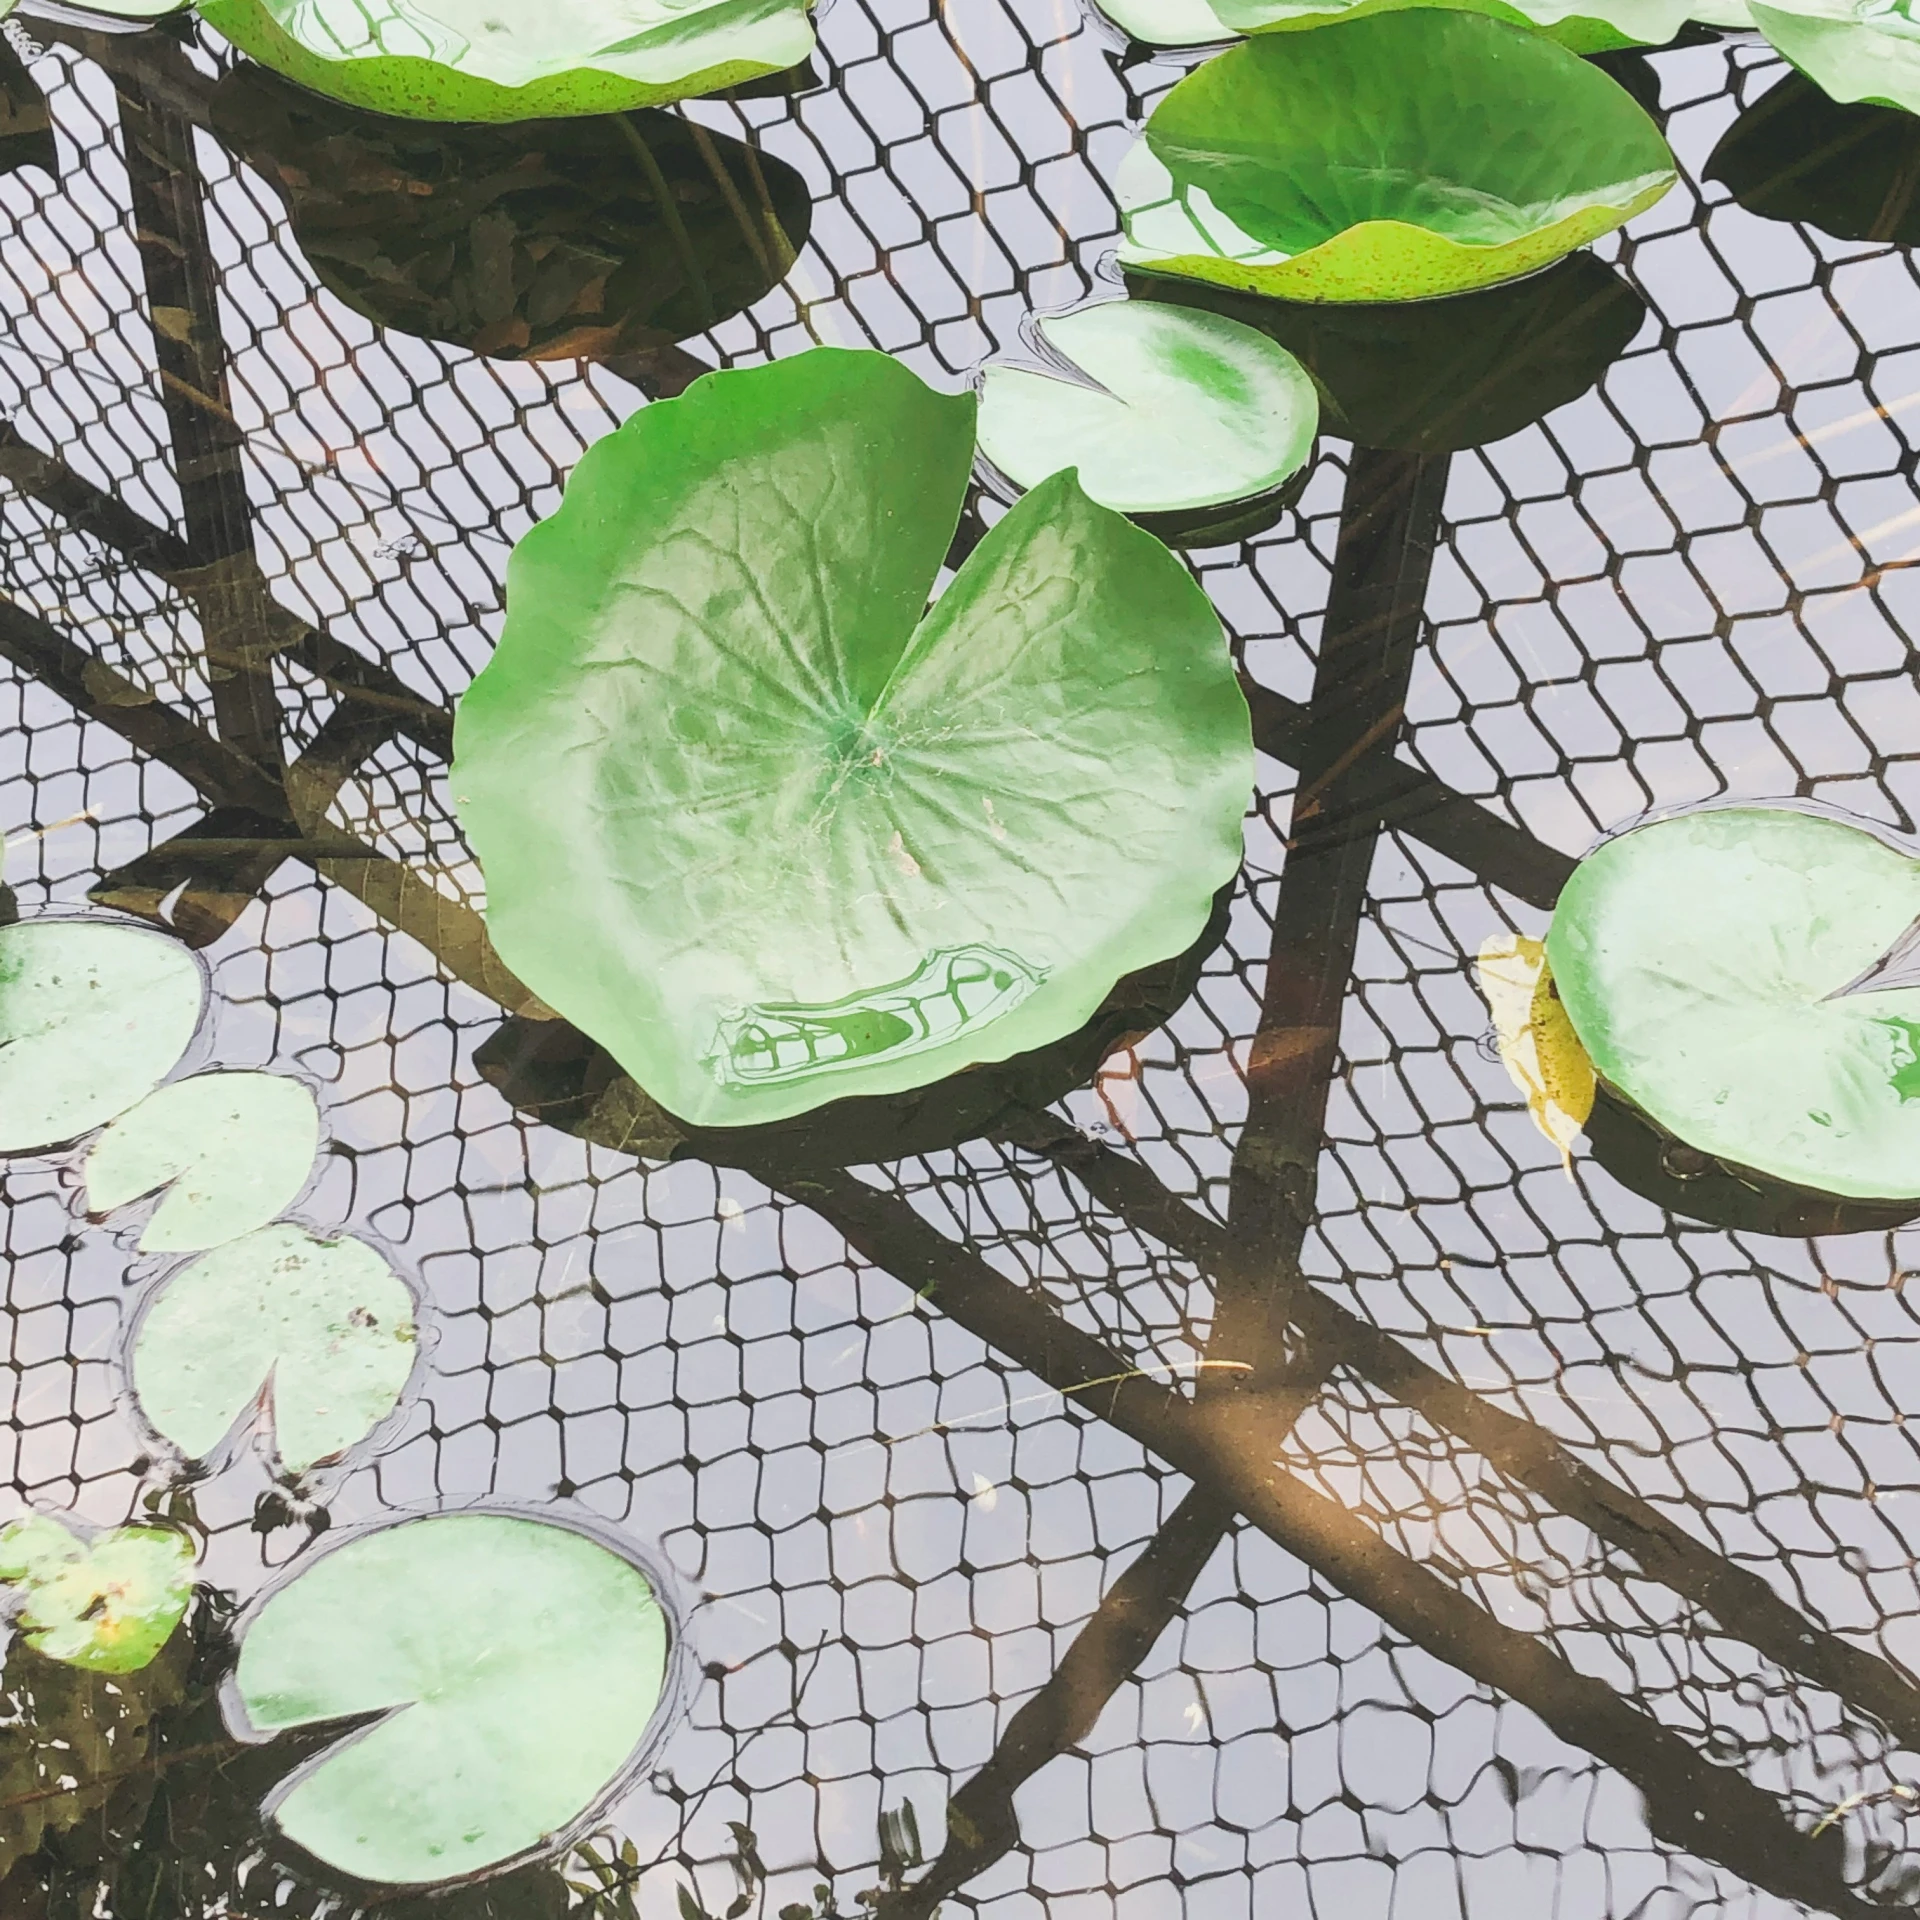 the water lillies are growing from the surface